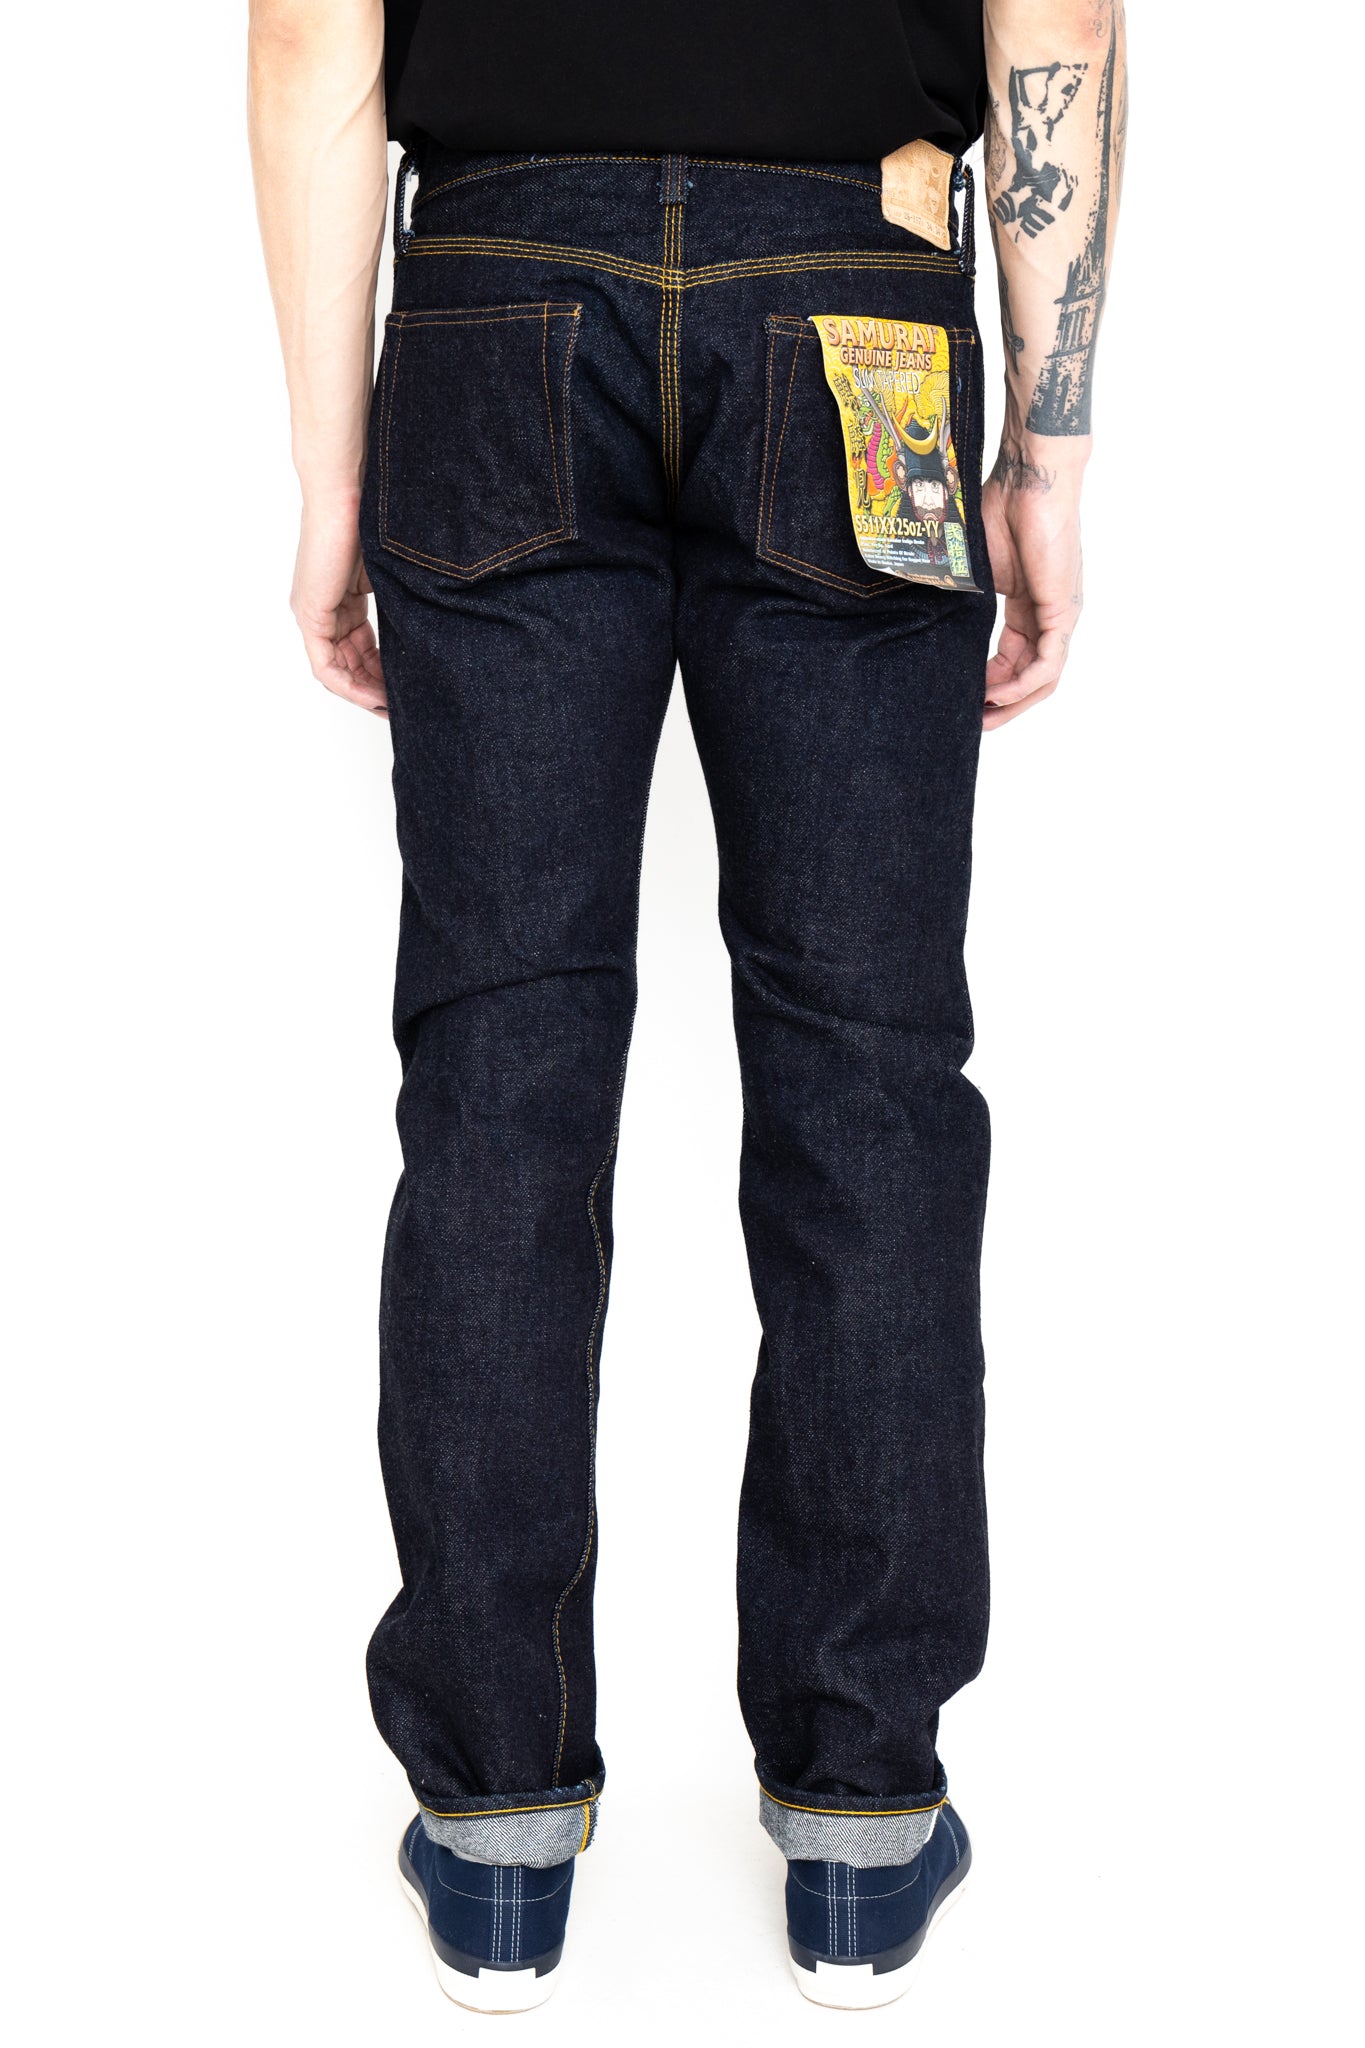 Samurai Jeans has released a limited edition"Kirinji" denim that rivals the rest. Coming in at 25oz, it is a true dark denim staple. Slim tapered in design, the jeans feature hidden rivets and an Iron Matsunoki button (tribute the laurel button and change the design to a lucky pine tree), and a Deerskin patch. 100% Cotton. Indigo (rope dyed). Made in Japan. Model is 6'3 and wearing a size 34. Unisex. 